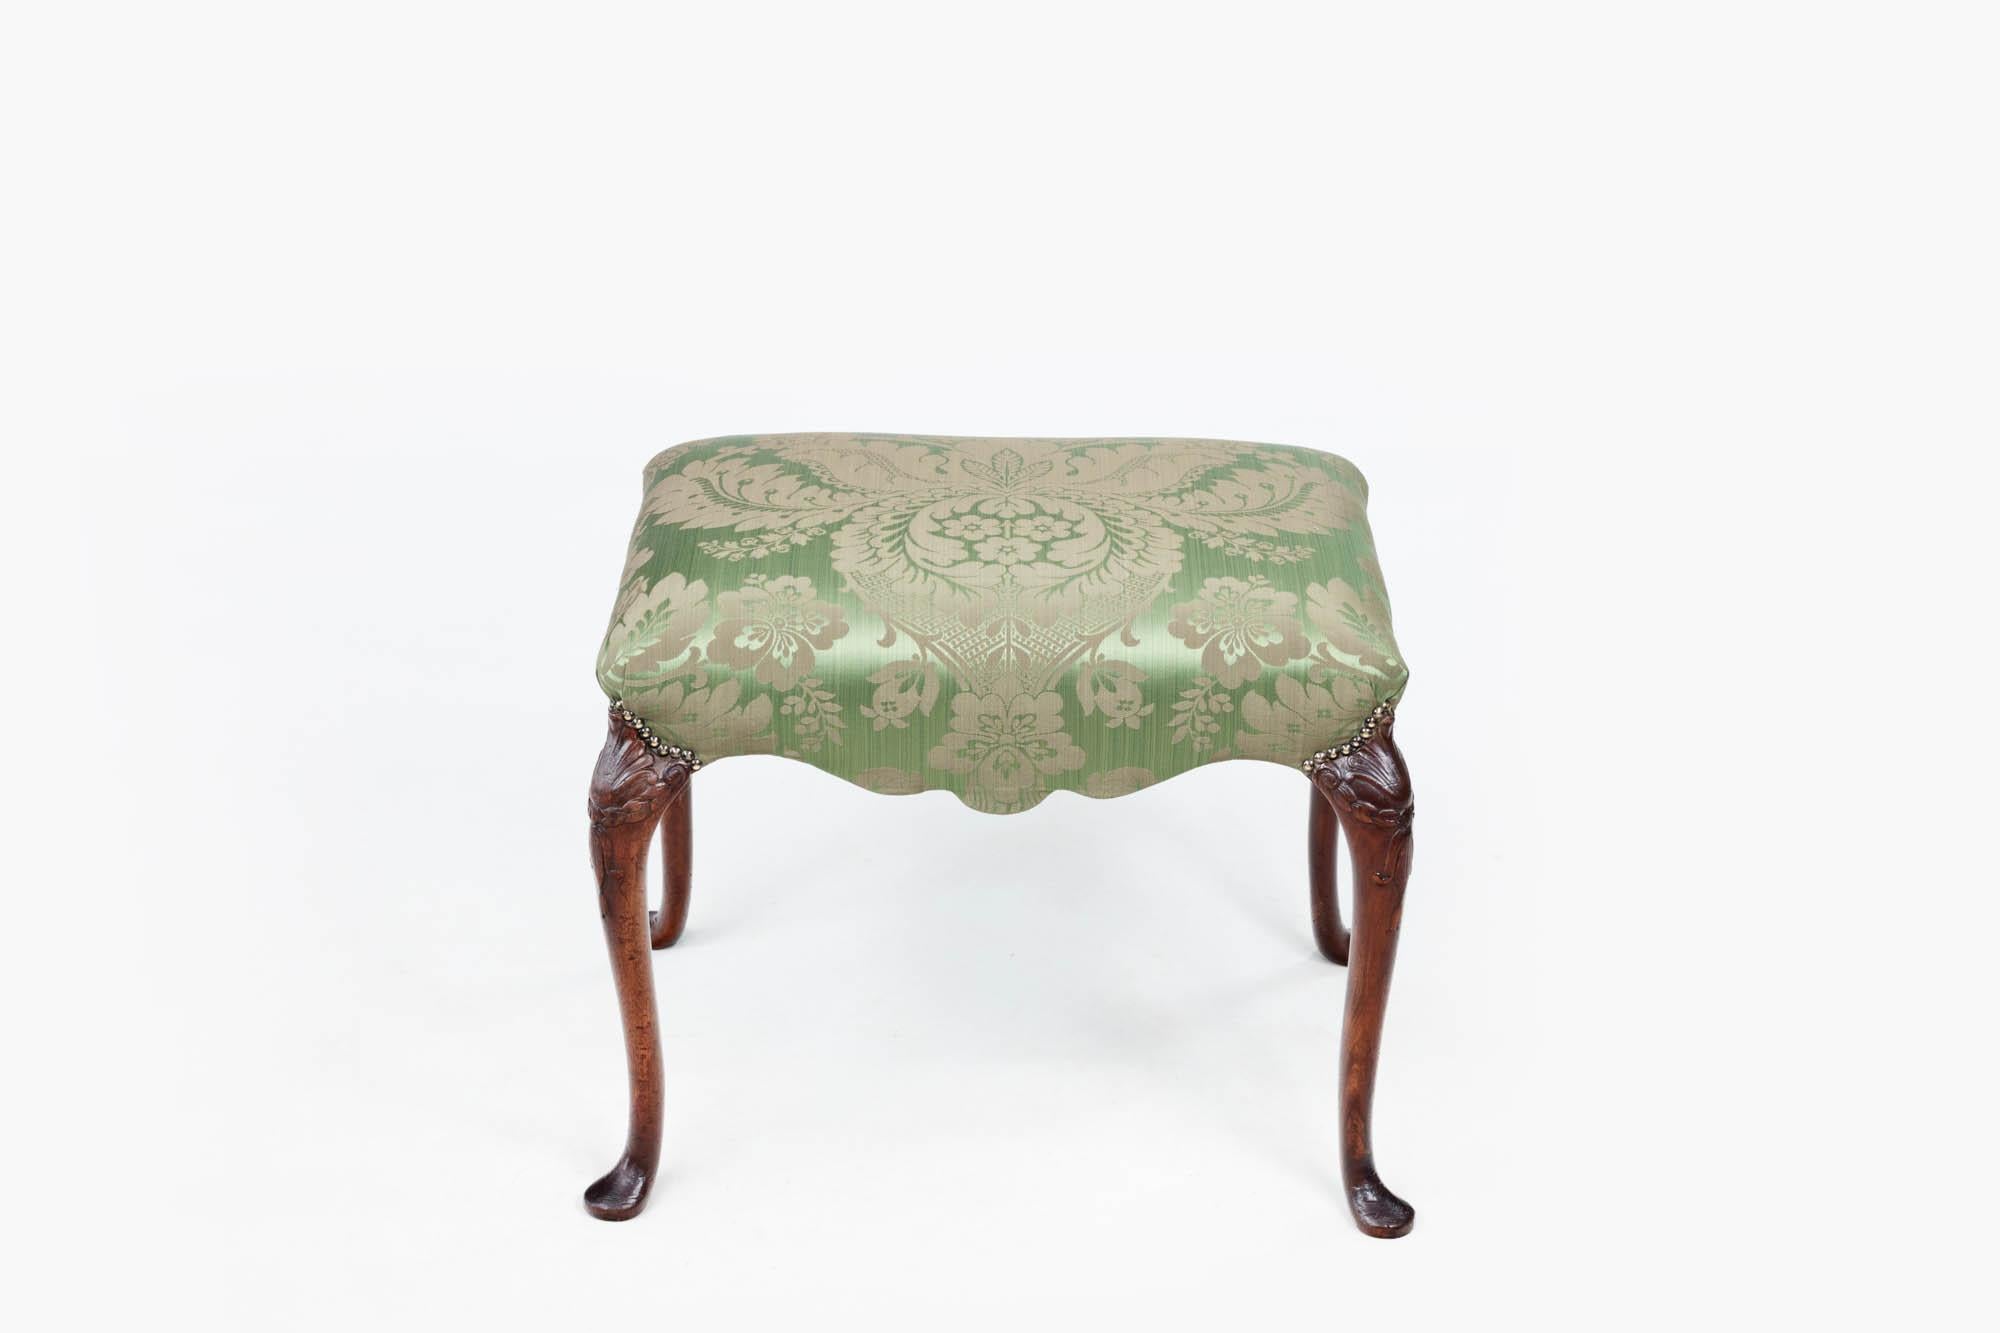 18th Century Irish Georgian Stool In Excellent Condition For Sale In Dublin 8, IE